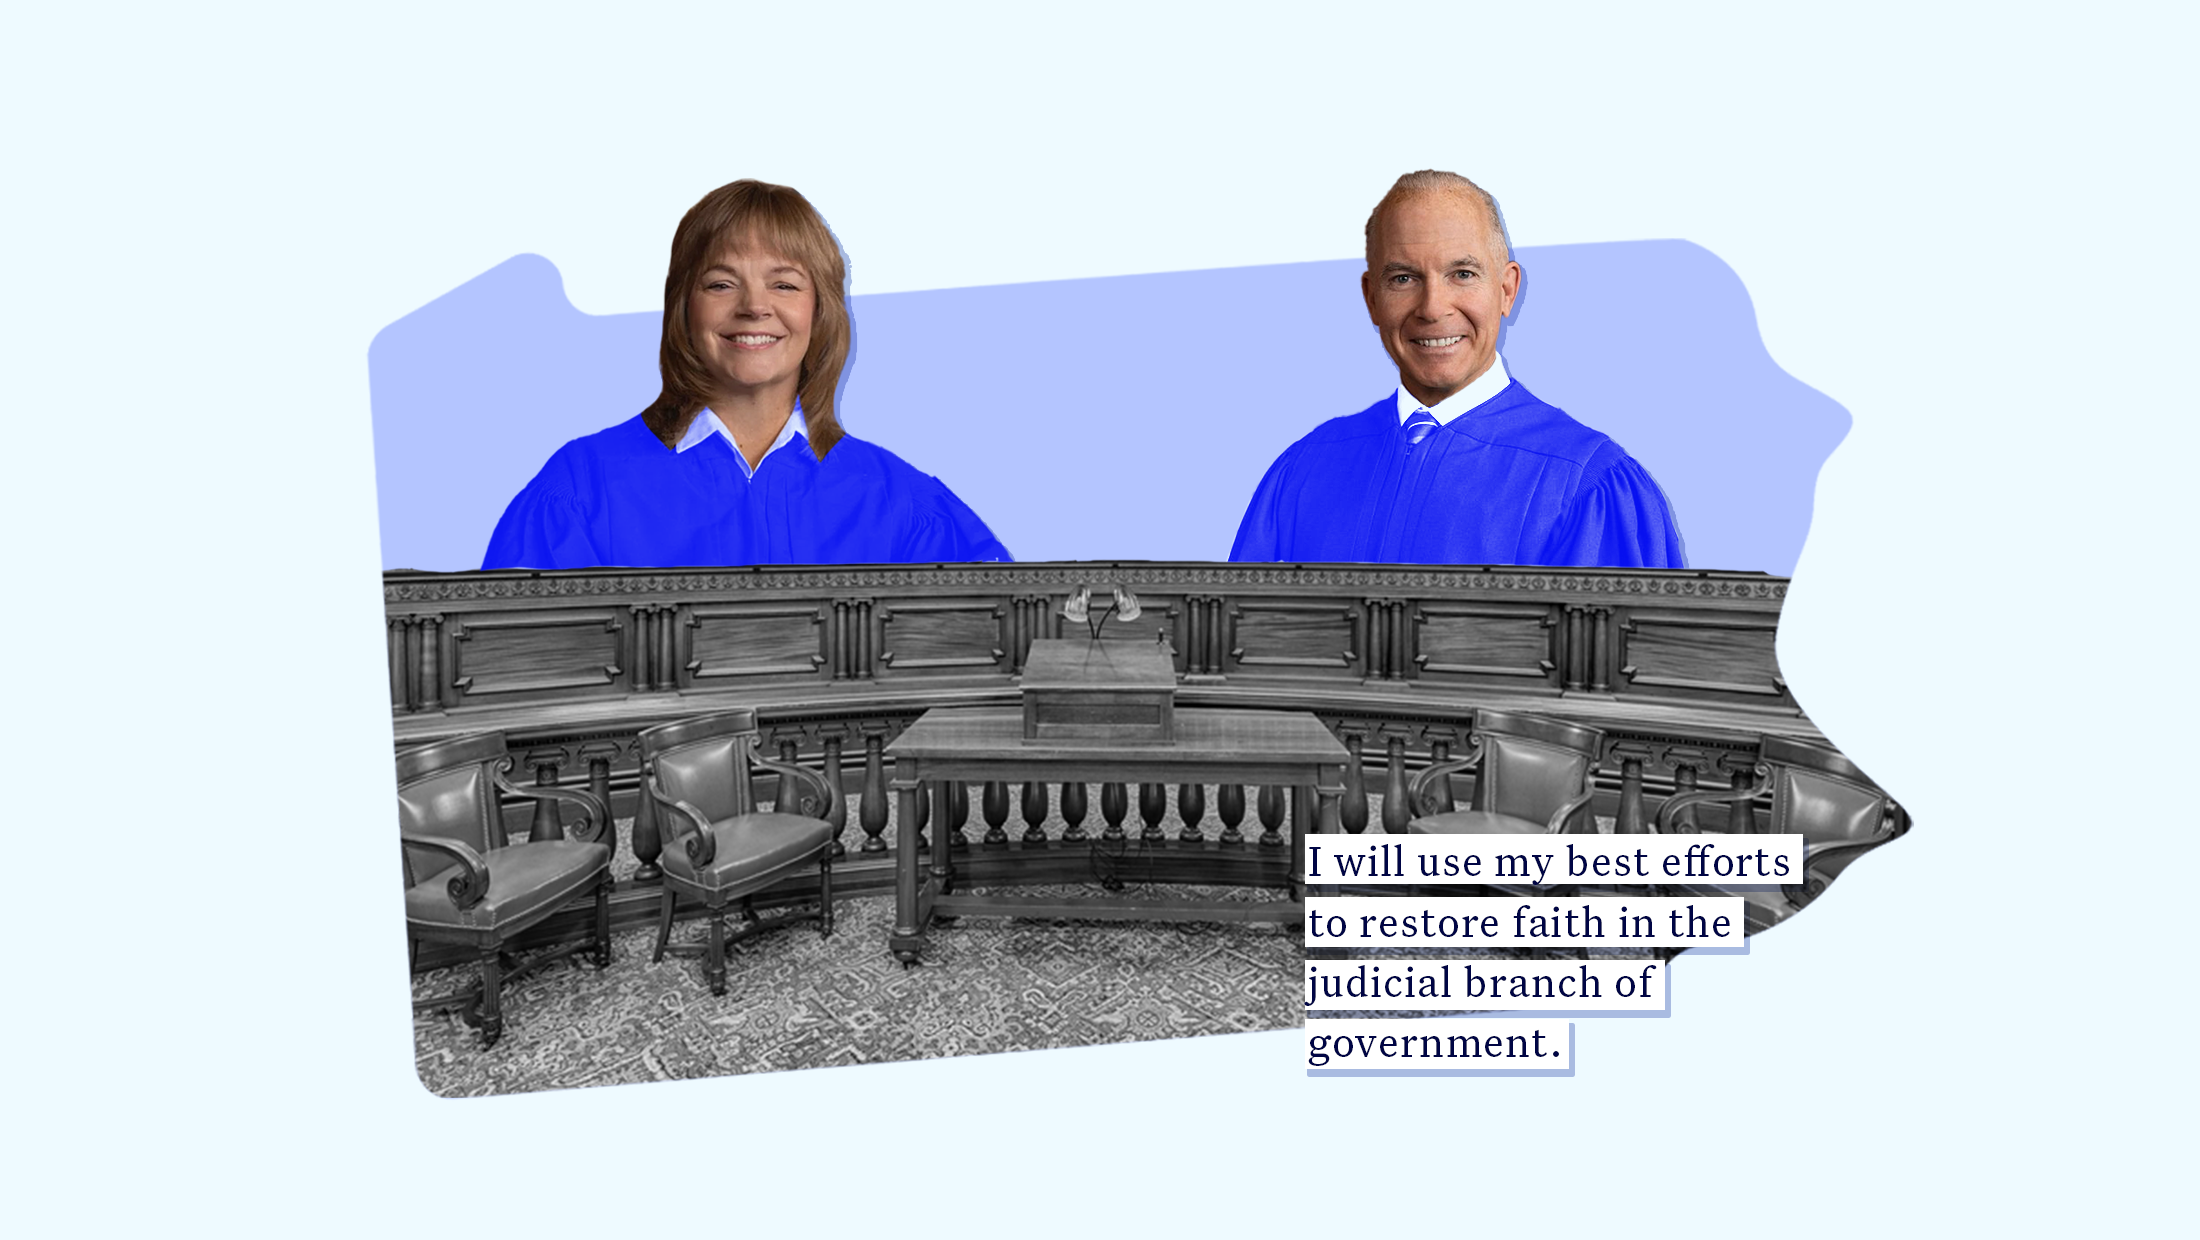 The two Democratic candidates for Supreme Court over a light blue outline of Pennsylvania, with a quote from one of the justices.